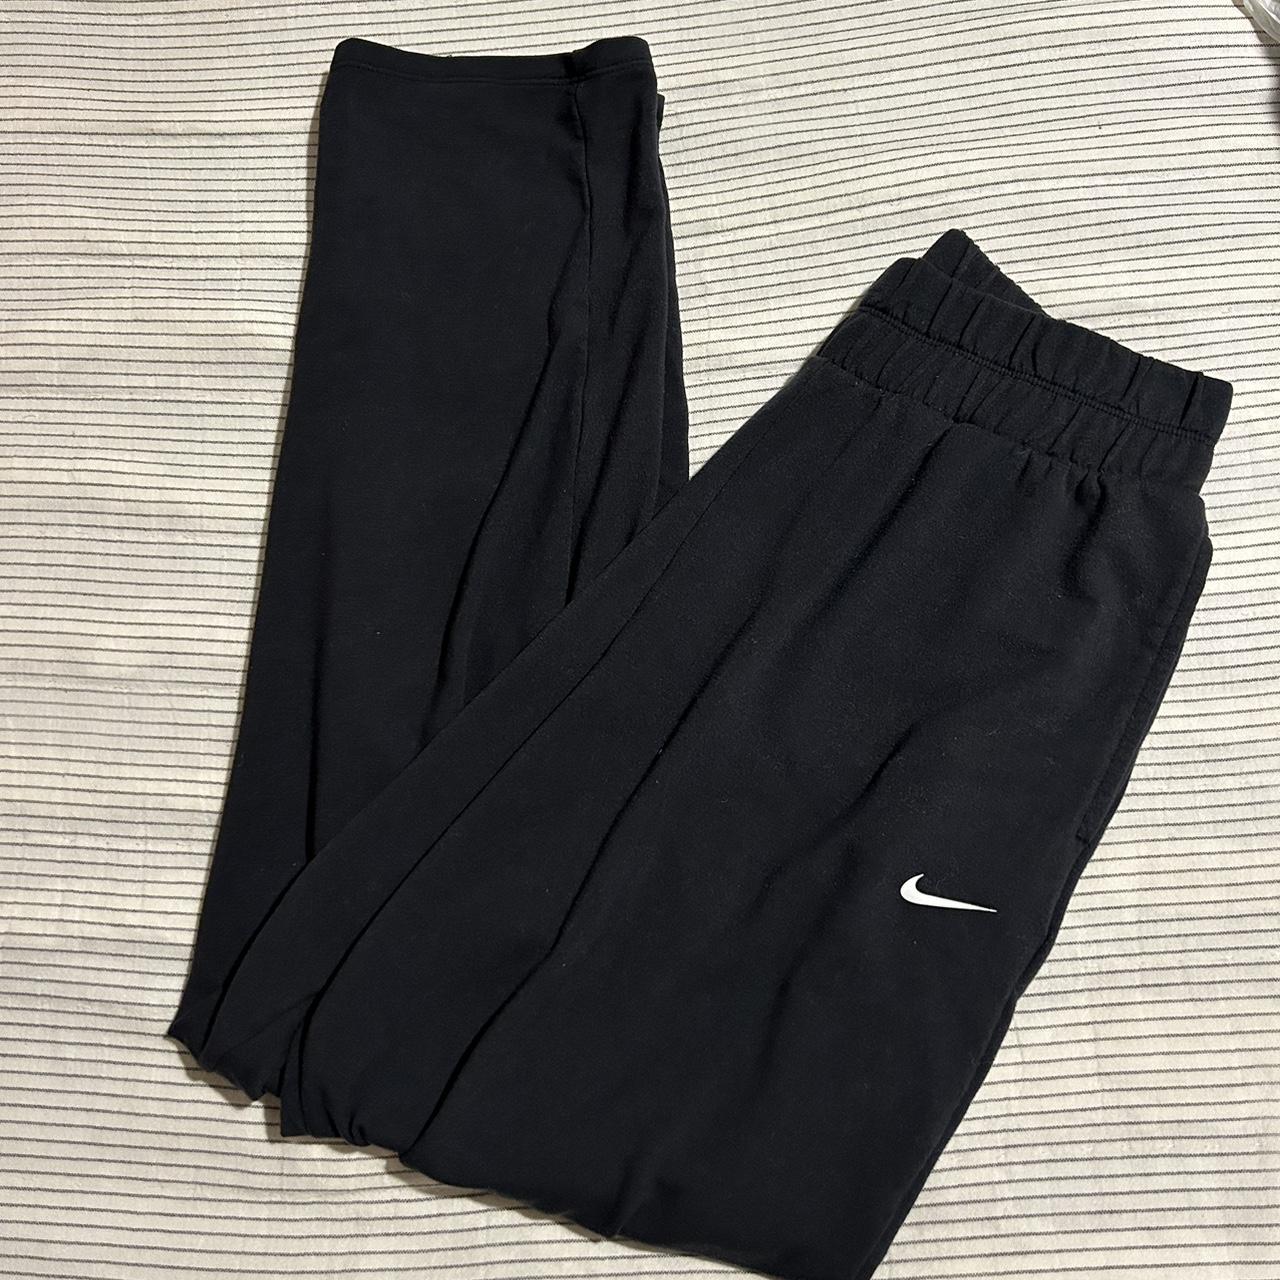 Nike Women's Small Therma-FIT Essential Warm Running - Depop